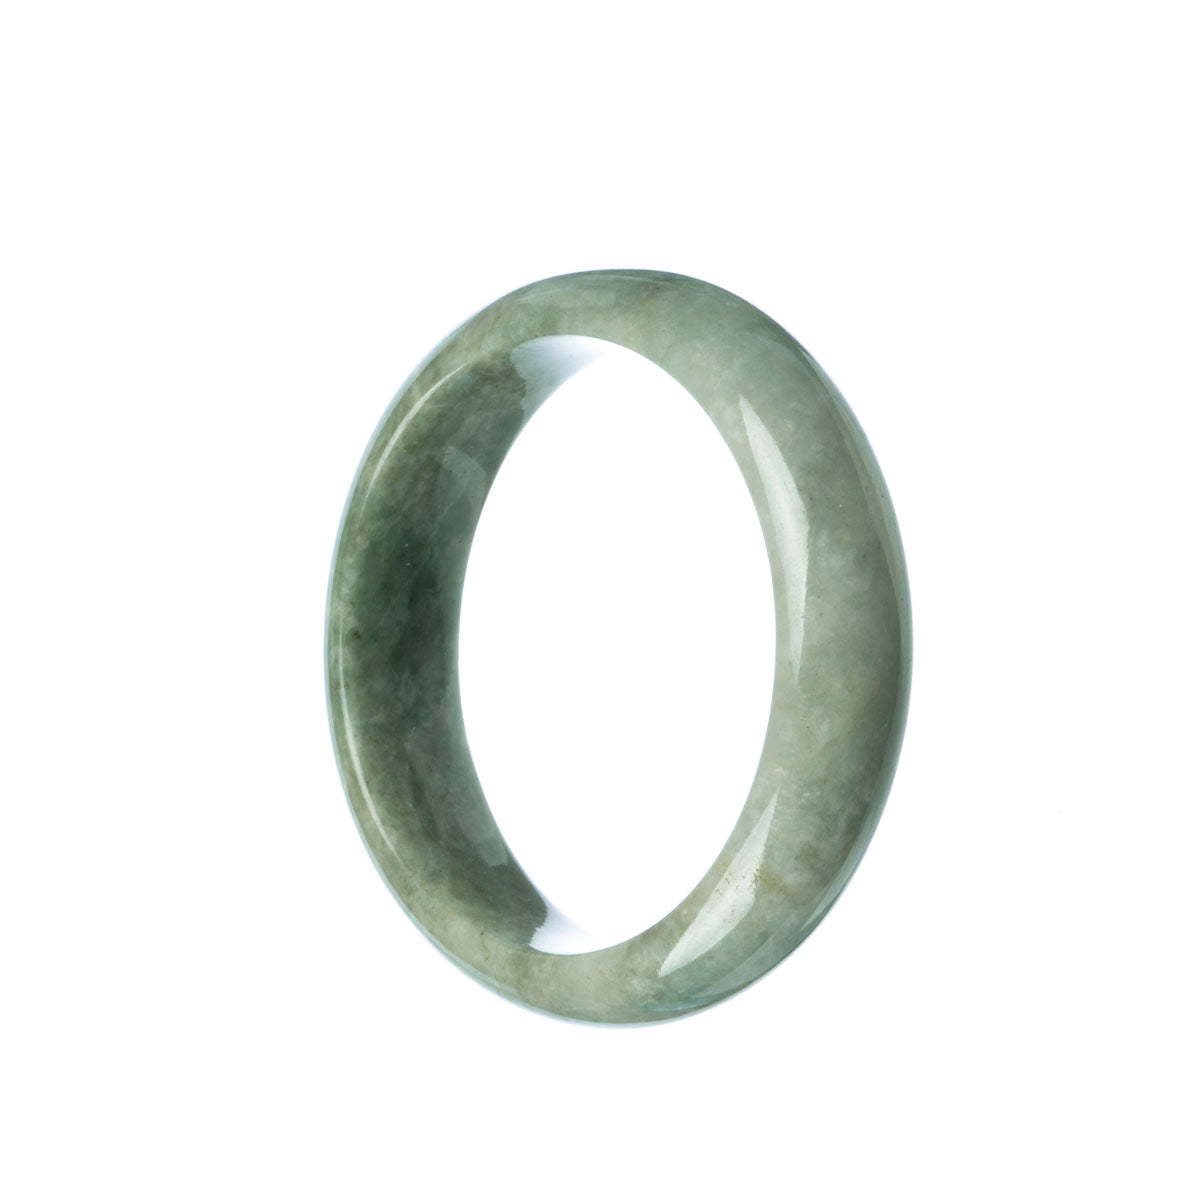 A close-up photo of a beautiful, high-quality green Burma Jade bracelet. The bracelet features a 53mm half moon shape and is made with real grade A Jade. It is a luxurious piece of jewelry that exudes elegance and sophistication.